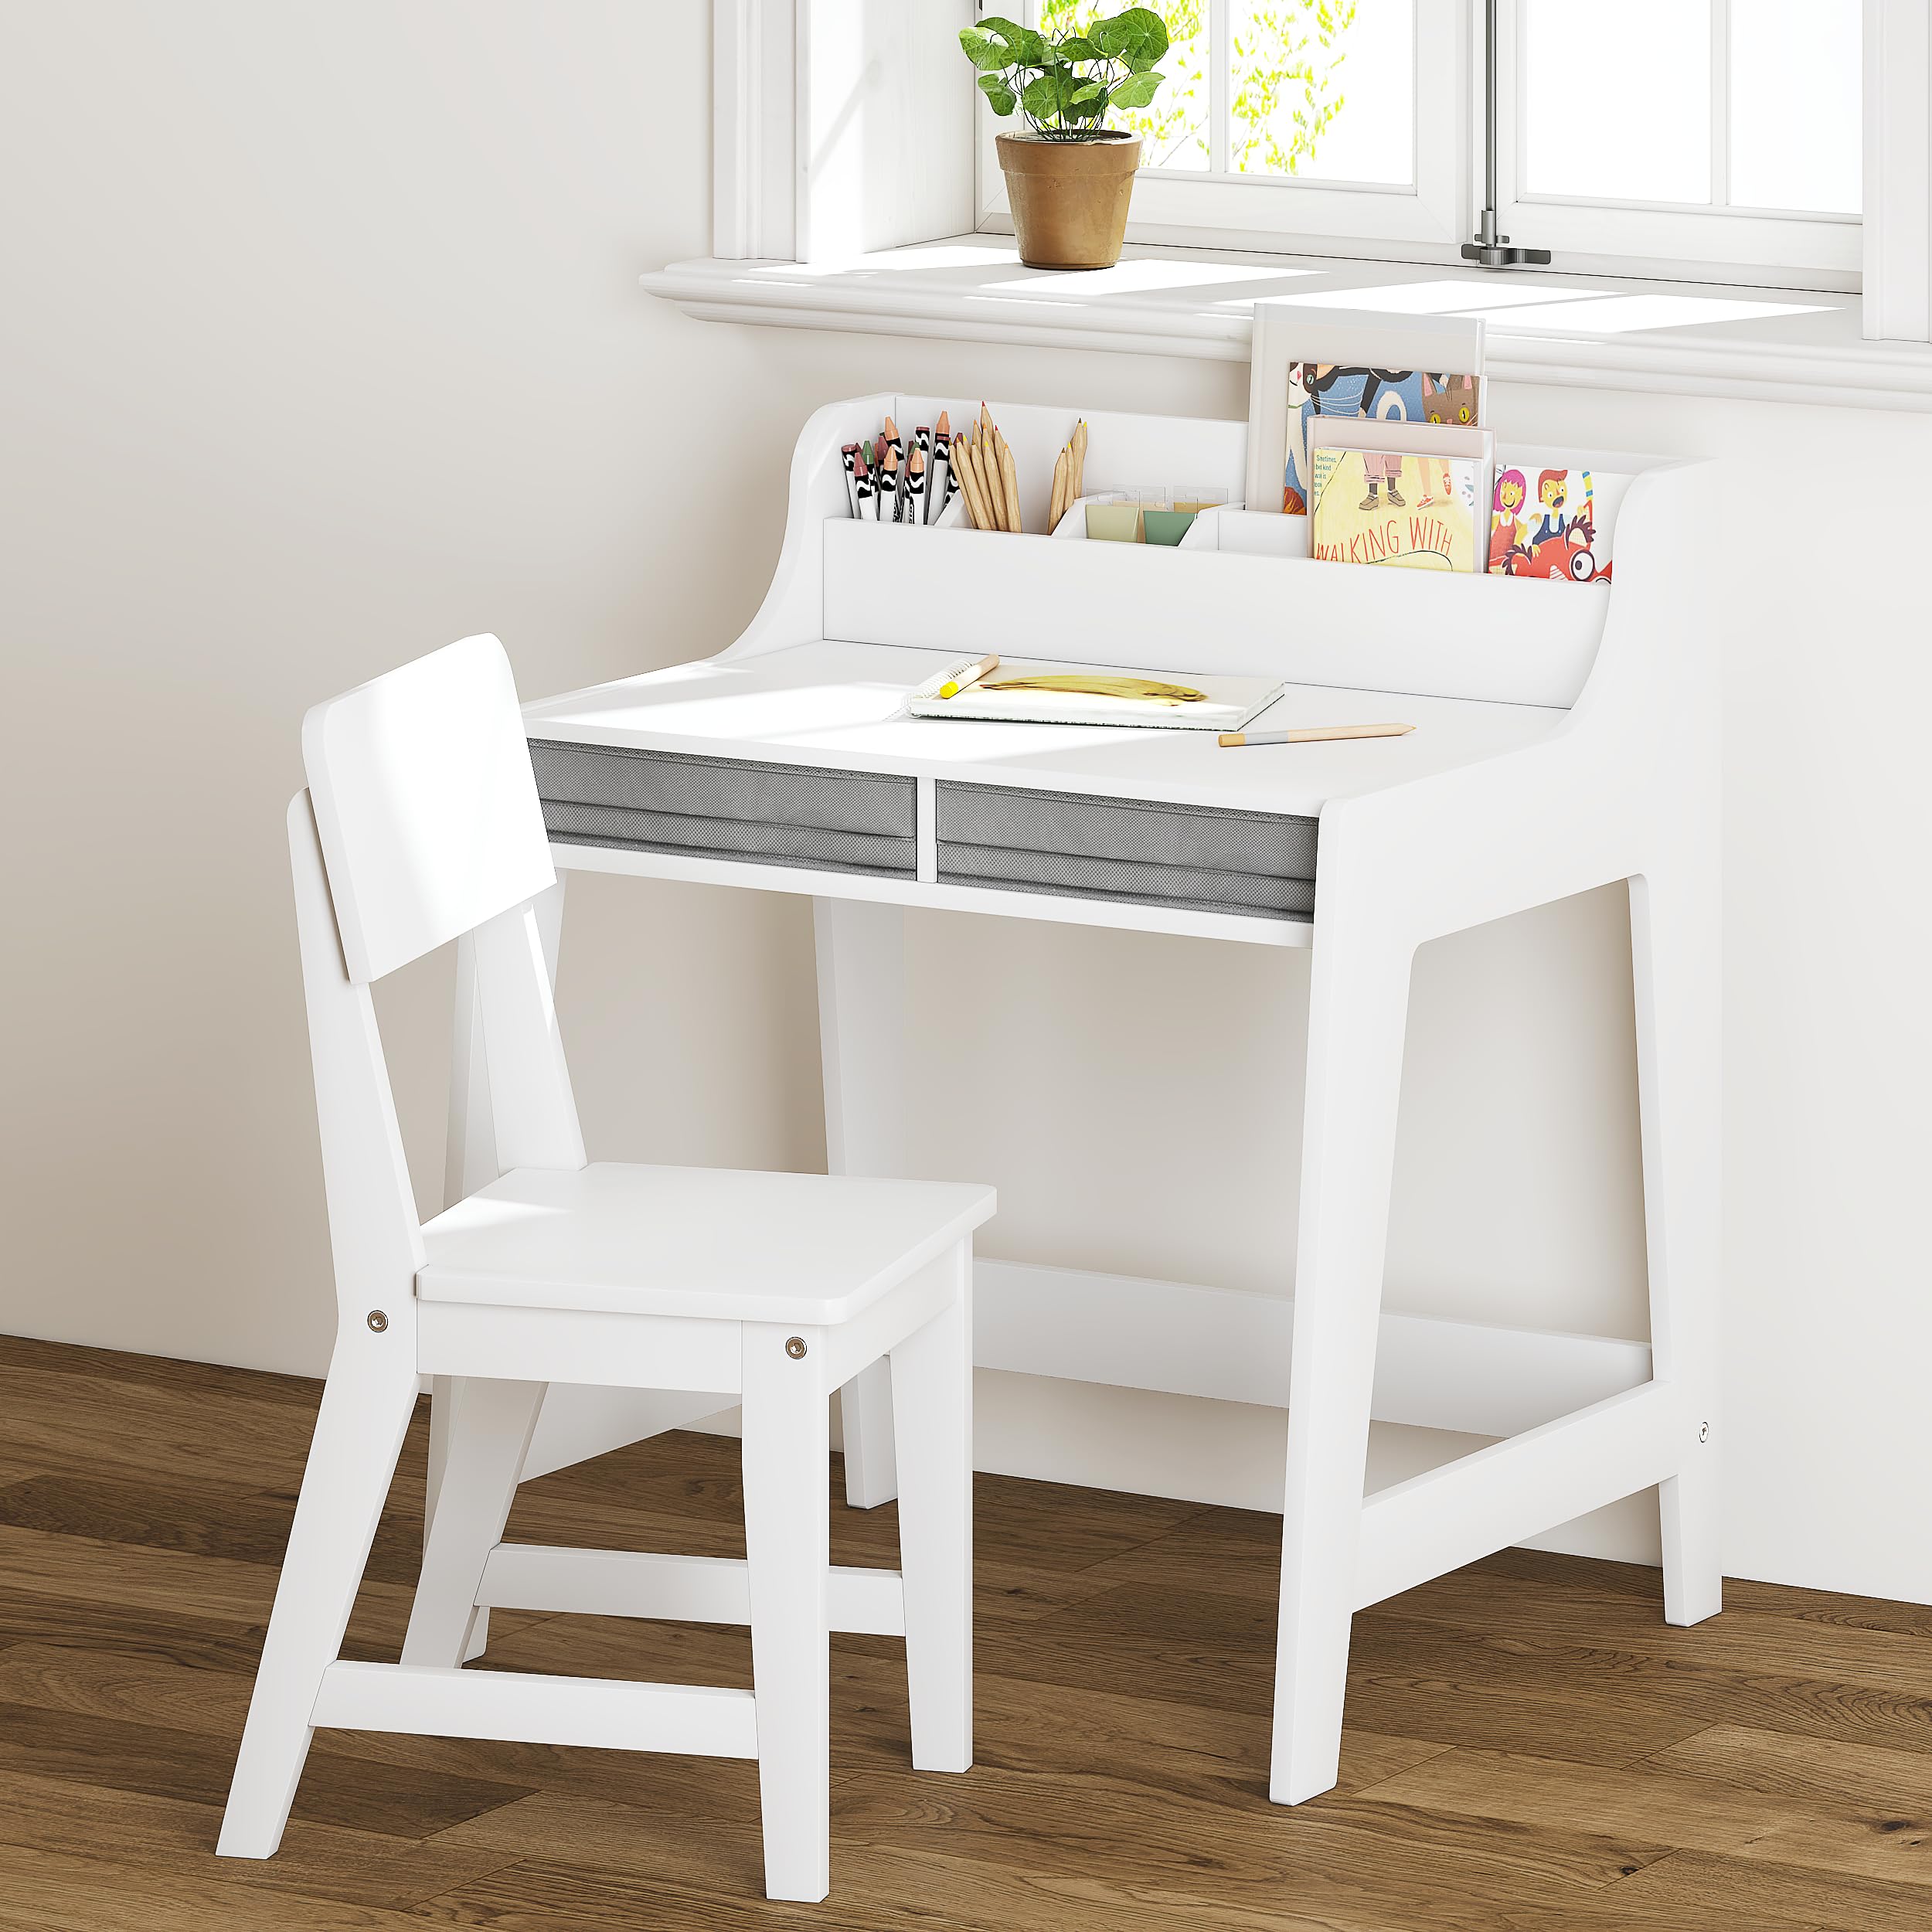 UTEX Kids Desk and Chair